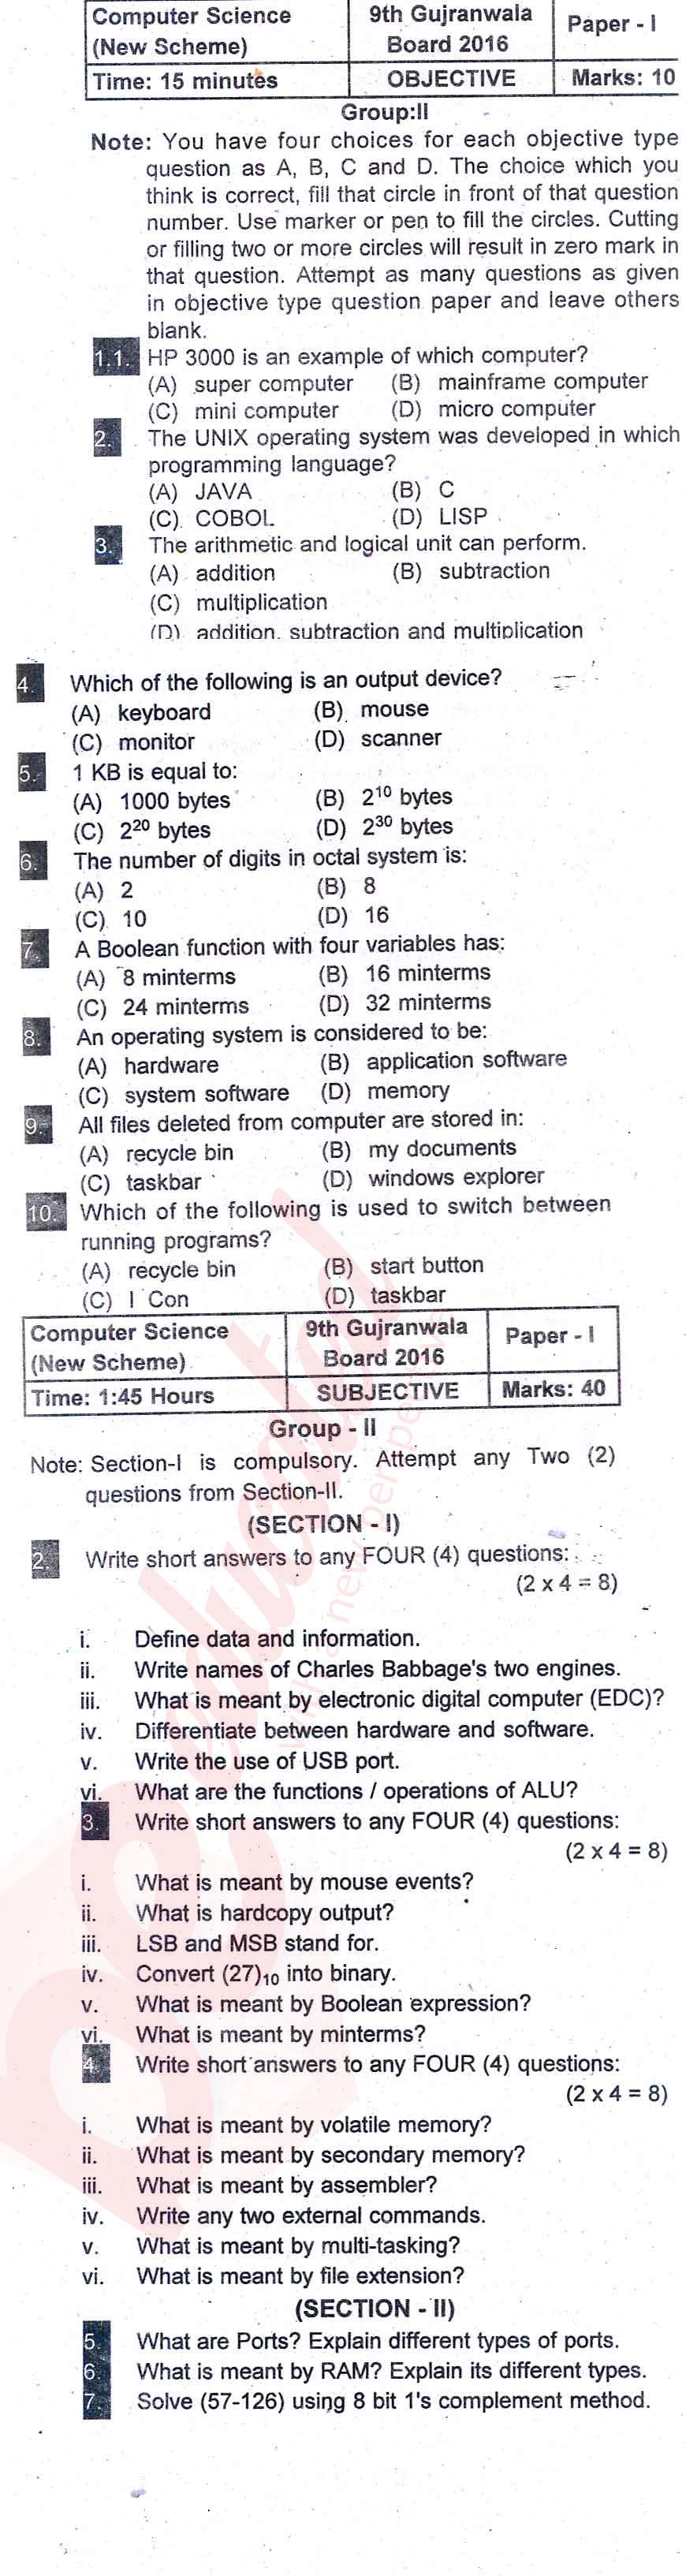 Computer Science 9th English Medium Past Paper Group 2 BISE Gujranwala 2016